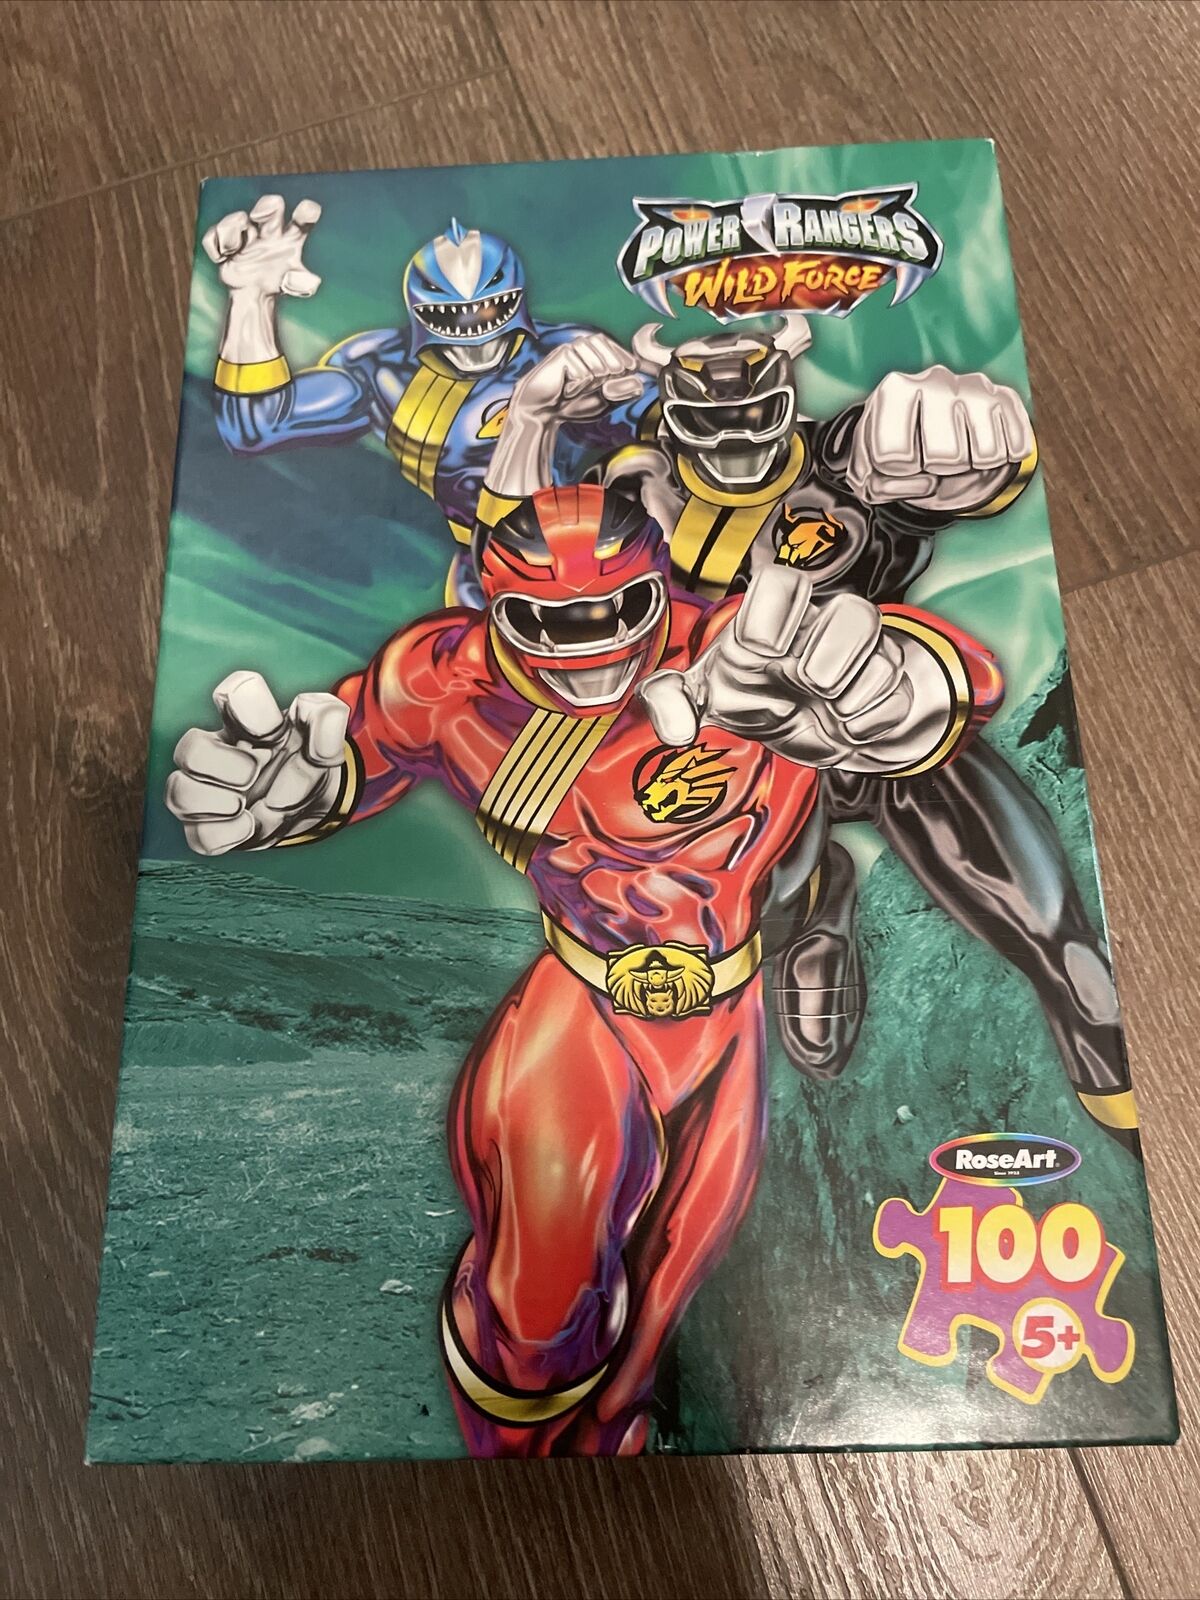 Power Rangers Wild Force 100 Pcs Puzzle (2002 RoseArt) RARE-Clean Factory sealed